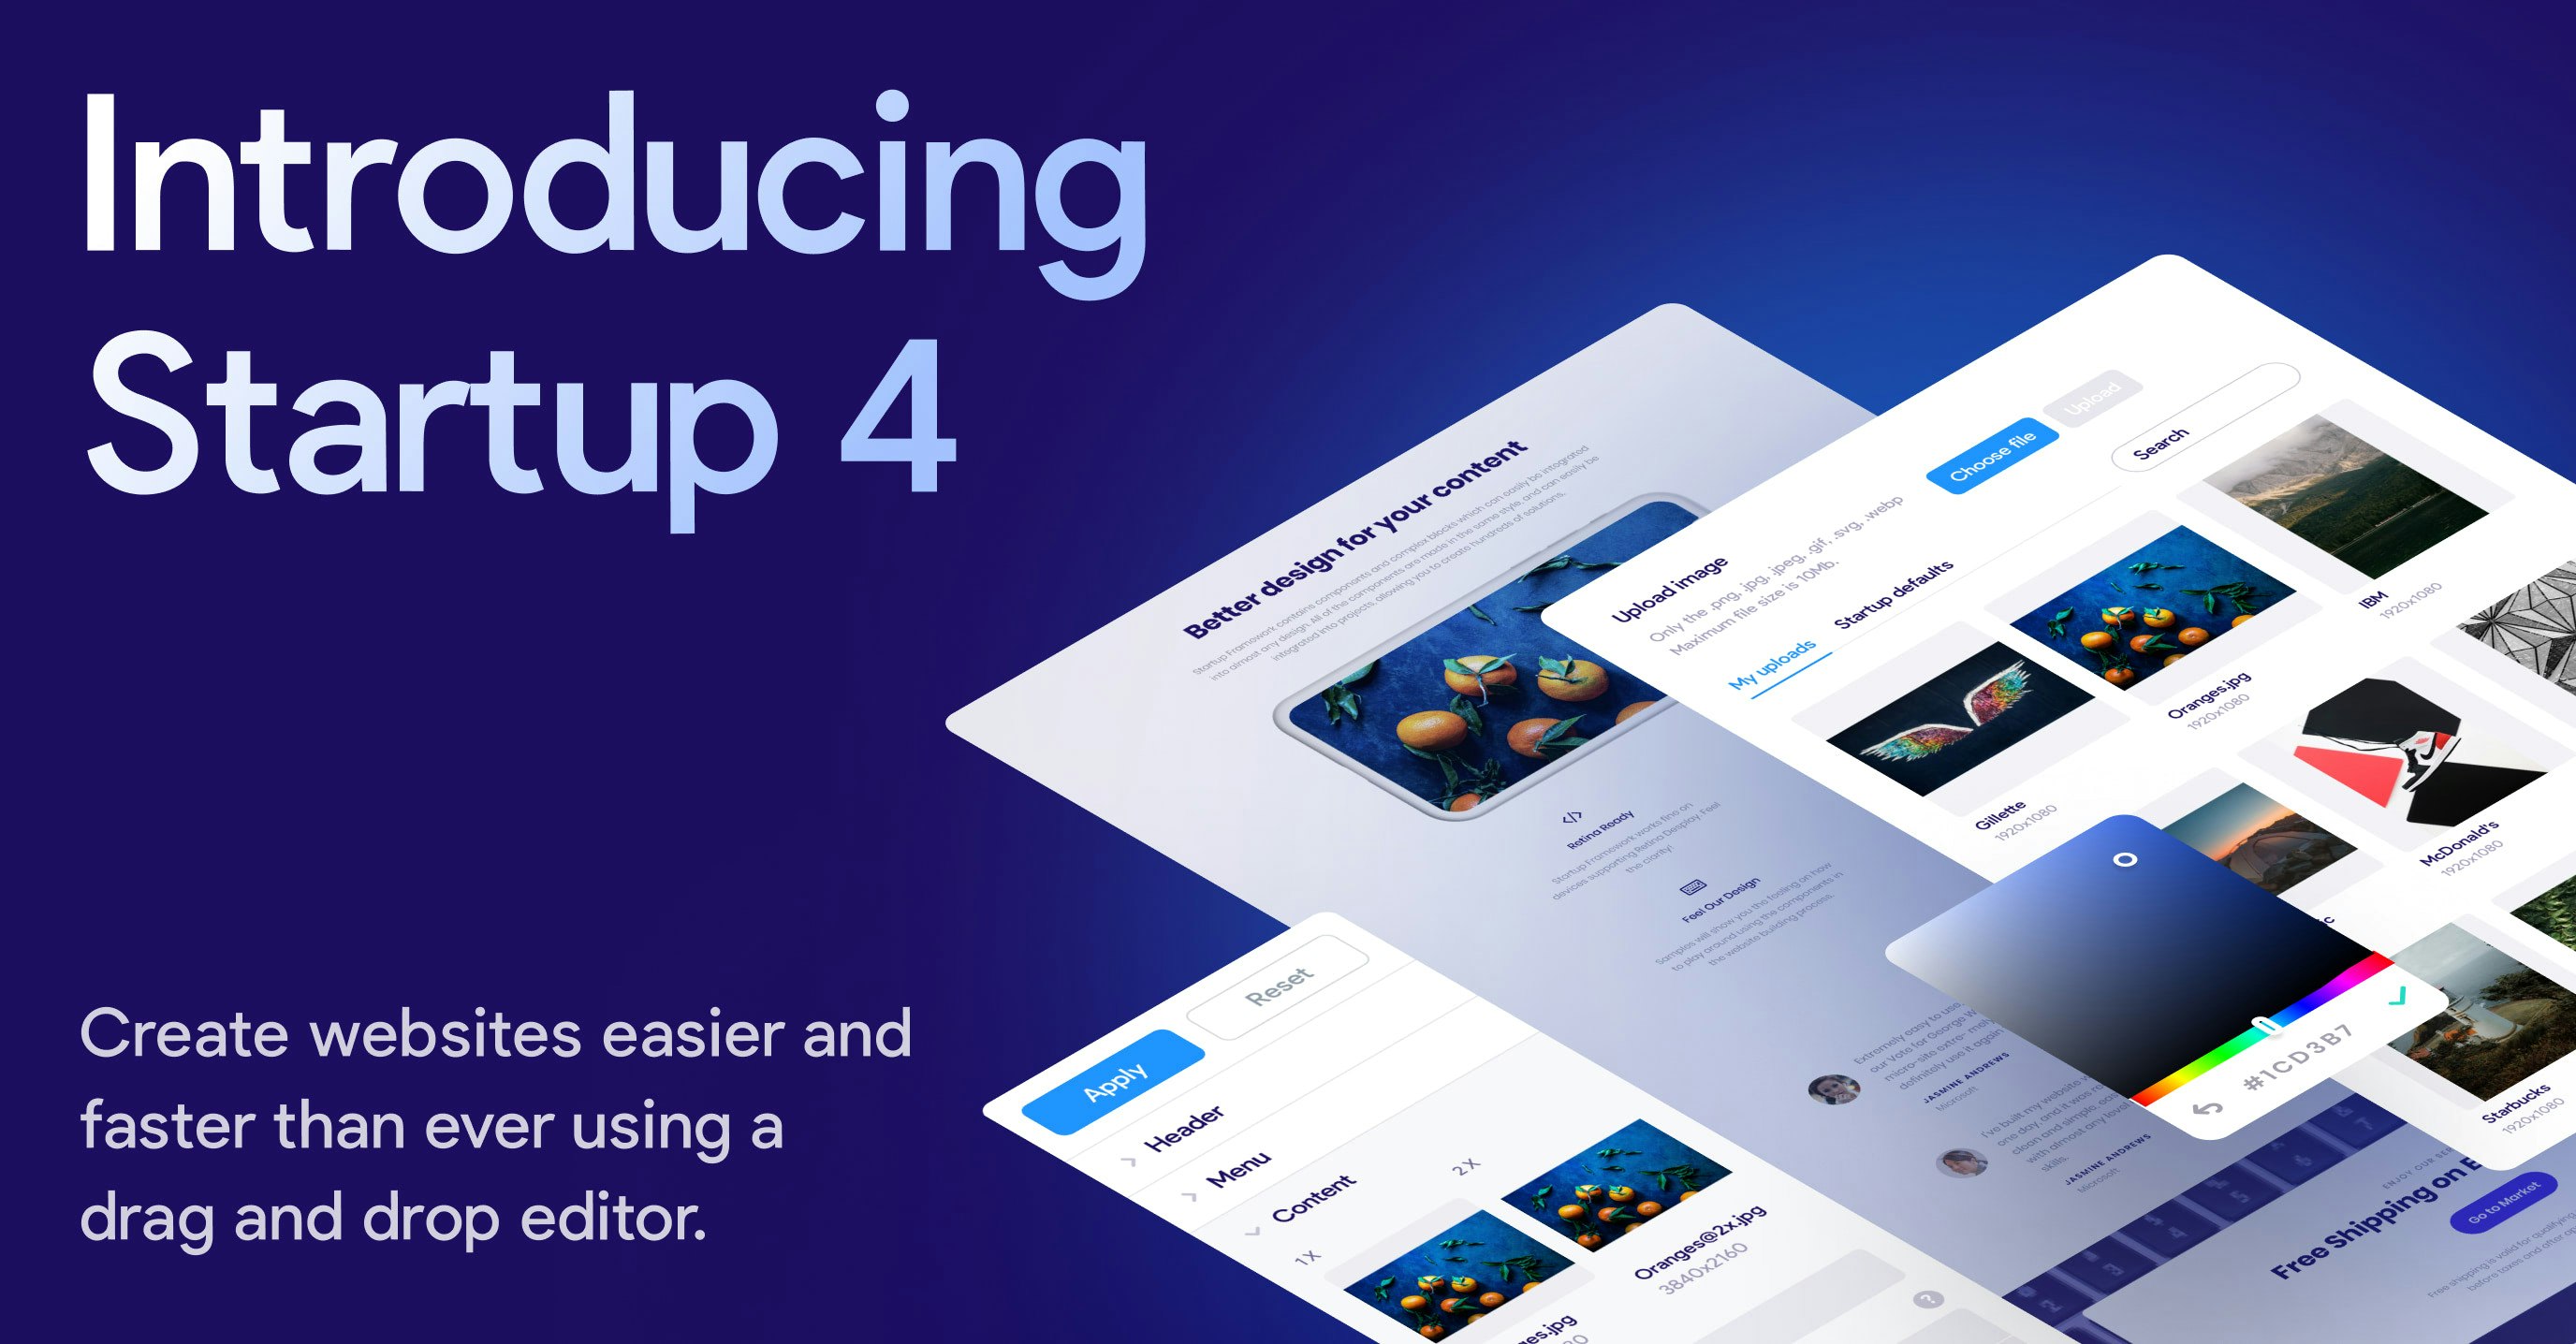 instal the new version for apple Responsive Bootstrap Builder 2.5.348